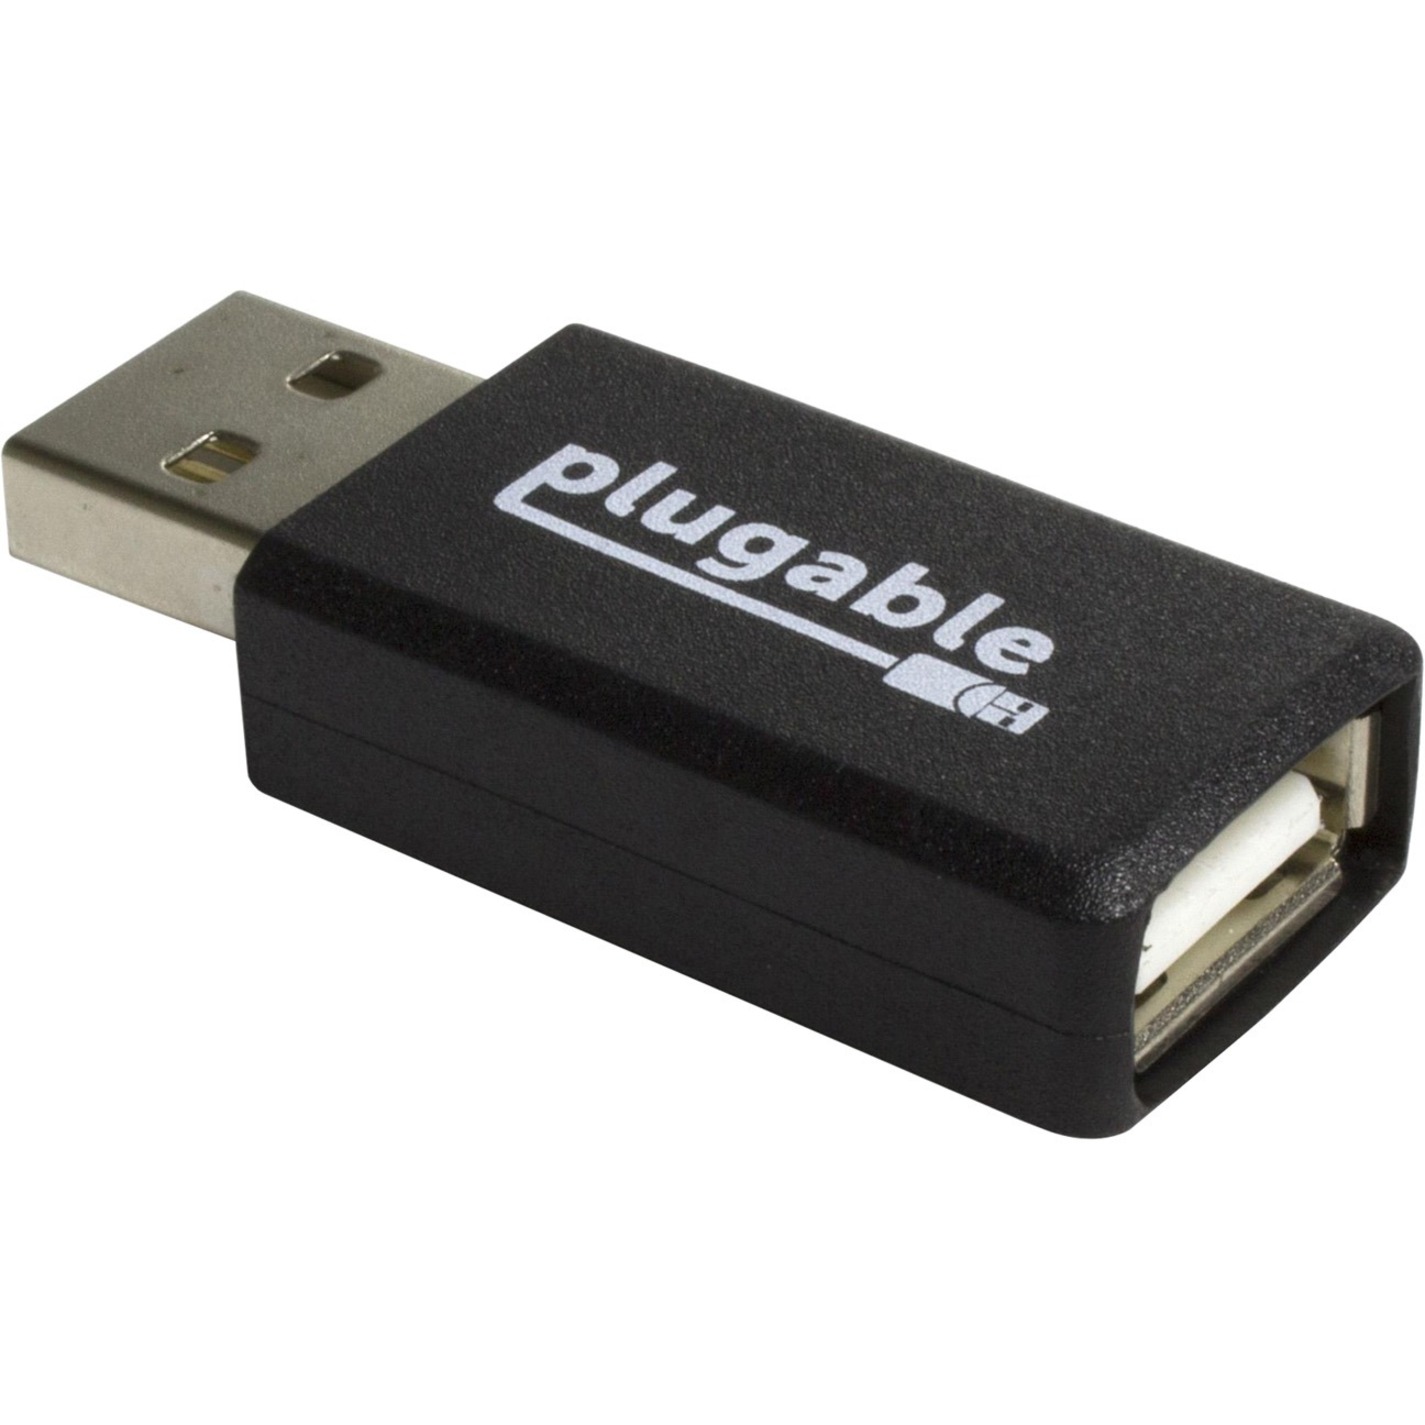 Plugable USB Universal Fast 1A Charge-Only Adapter for Android, Apple iOS, and Windows Mobile Devices - image 1 of 5